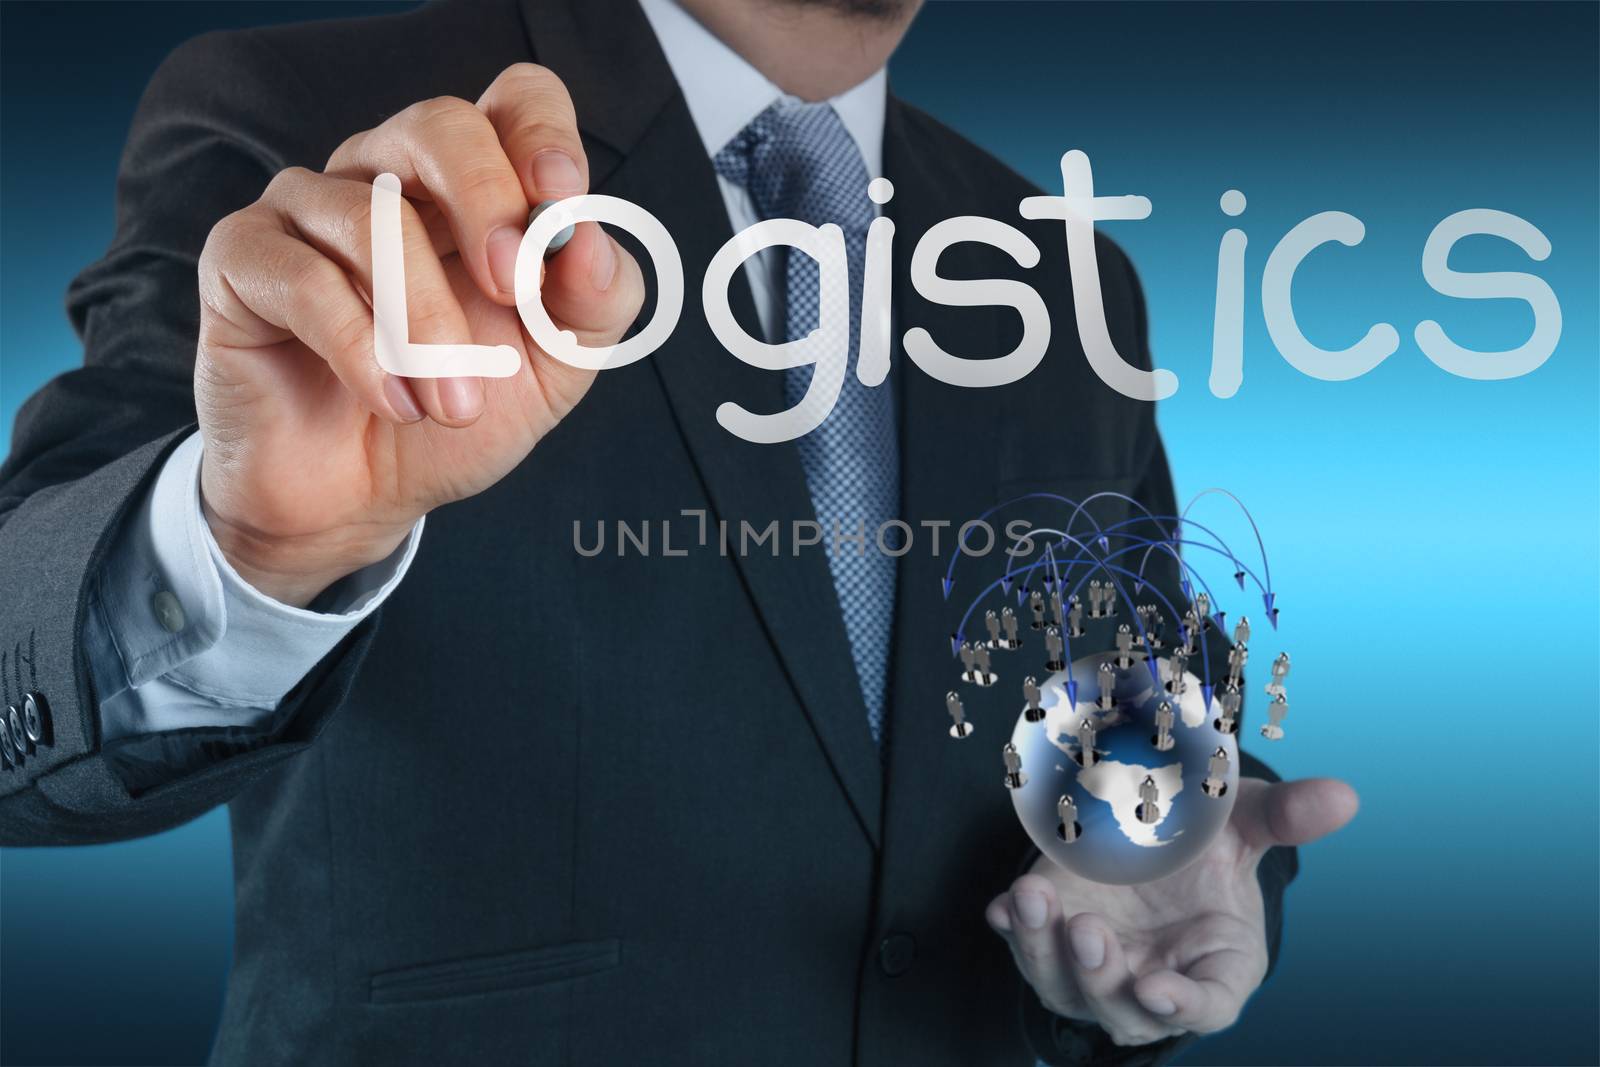 businessman shows logistics diagram as concept by everythingpossible